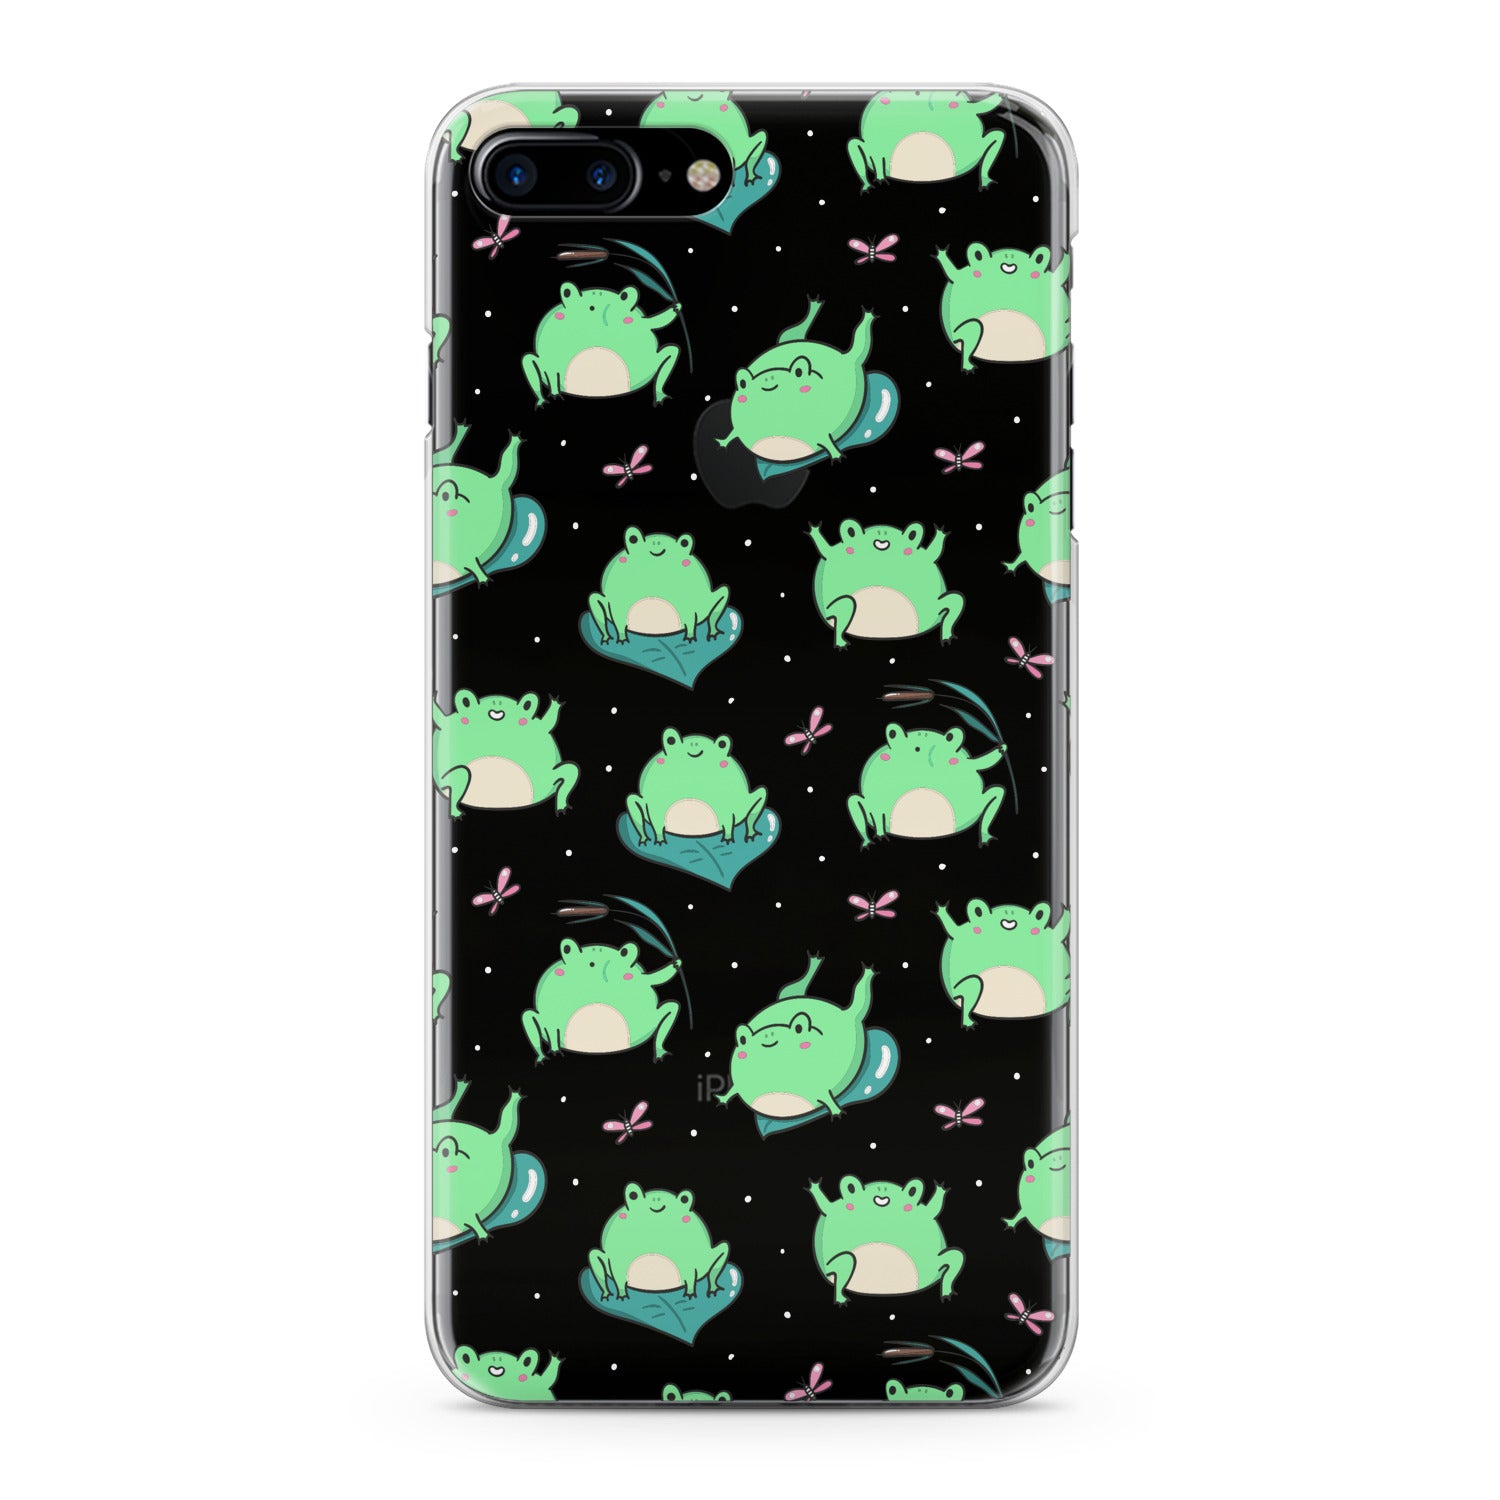 Lex Altern Kawaii Frogs Pattern Phone Case for your iPhone & Android phone.